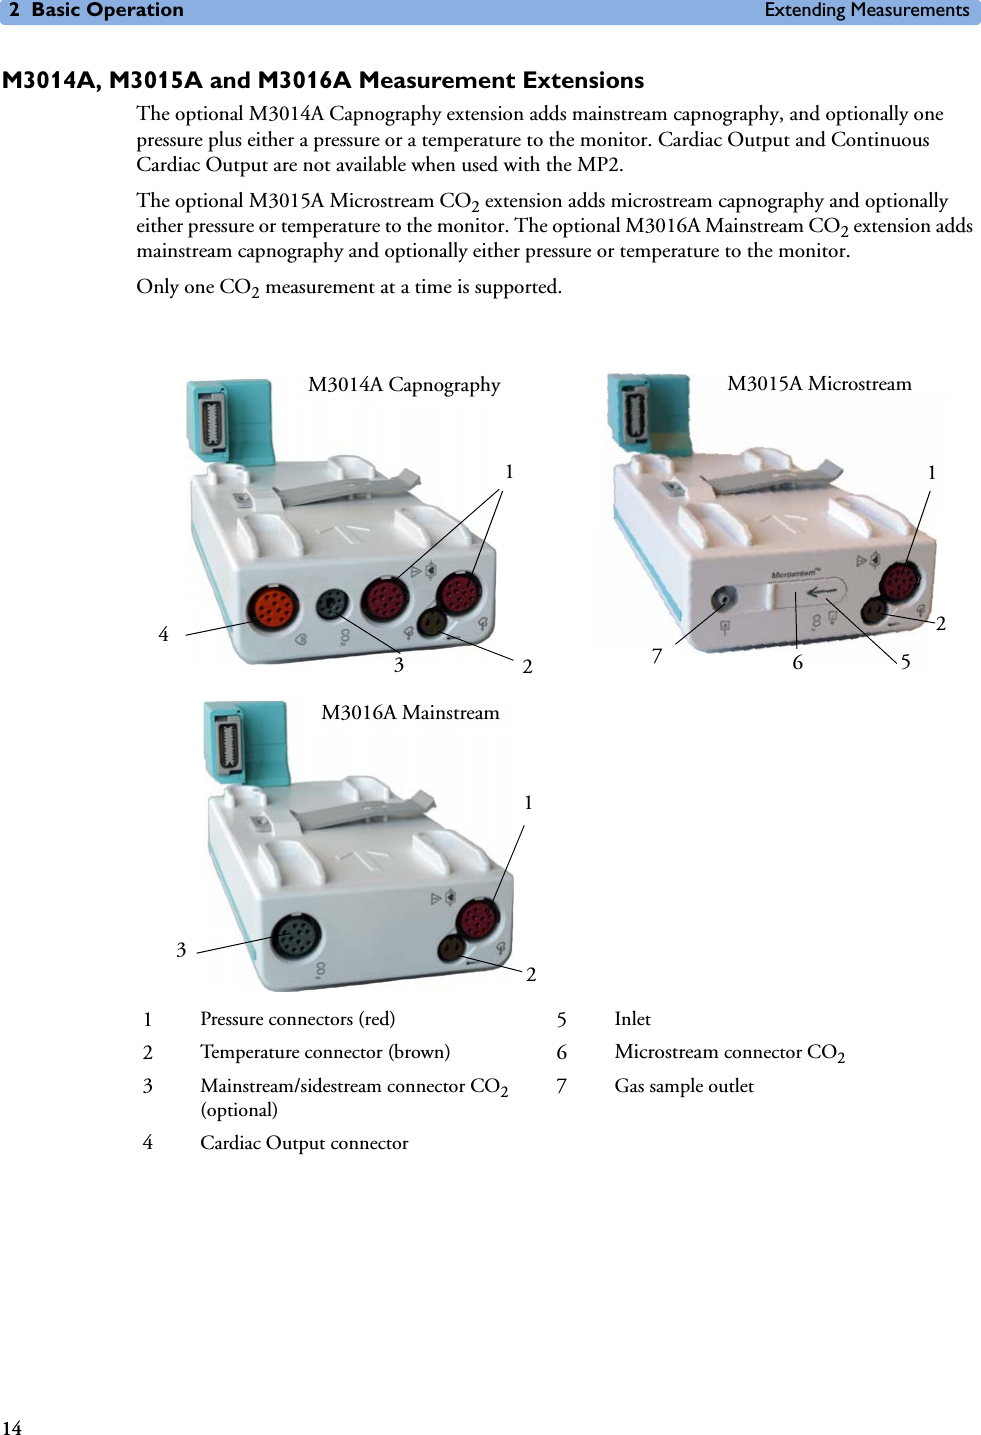 2 Basic Operation Extending Measurements14M3014A, M3015A and M3016A Measurement ExtensionsThe optional M3014A Capnography extension adds mainstream capnography, and optionally one pressure plus either a pressure or a temperature to the monitor. Cardiac Output and Continuous Cardiac Output are not available when used with the MP2.The optional M3015A Microstream CO2 extension adds microstream capnography and optionally either pressure or temperature to the monitor. The optional M3016A Mainstream CO2 extension adds mainstream capnography and optionally either pressure or temperature to the monitor. Only one CO2 measurement at a time is supported.1Pressure connectors (red) 5Inlet2Temperature connector (brown) 6Microstream connector CO23Mainstream/sidestream connector CO2 (optional)7Gas sample outlet4Cardiac Output connector M3014A Capnography M3015A Microstream12613275412M3016A Mainstream3